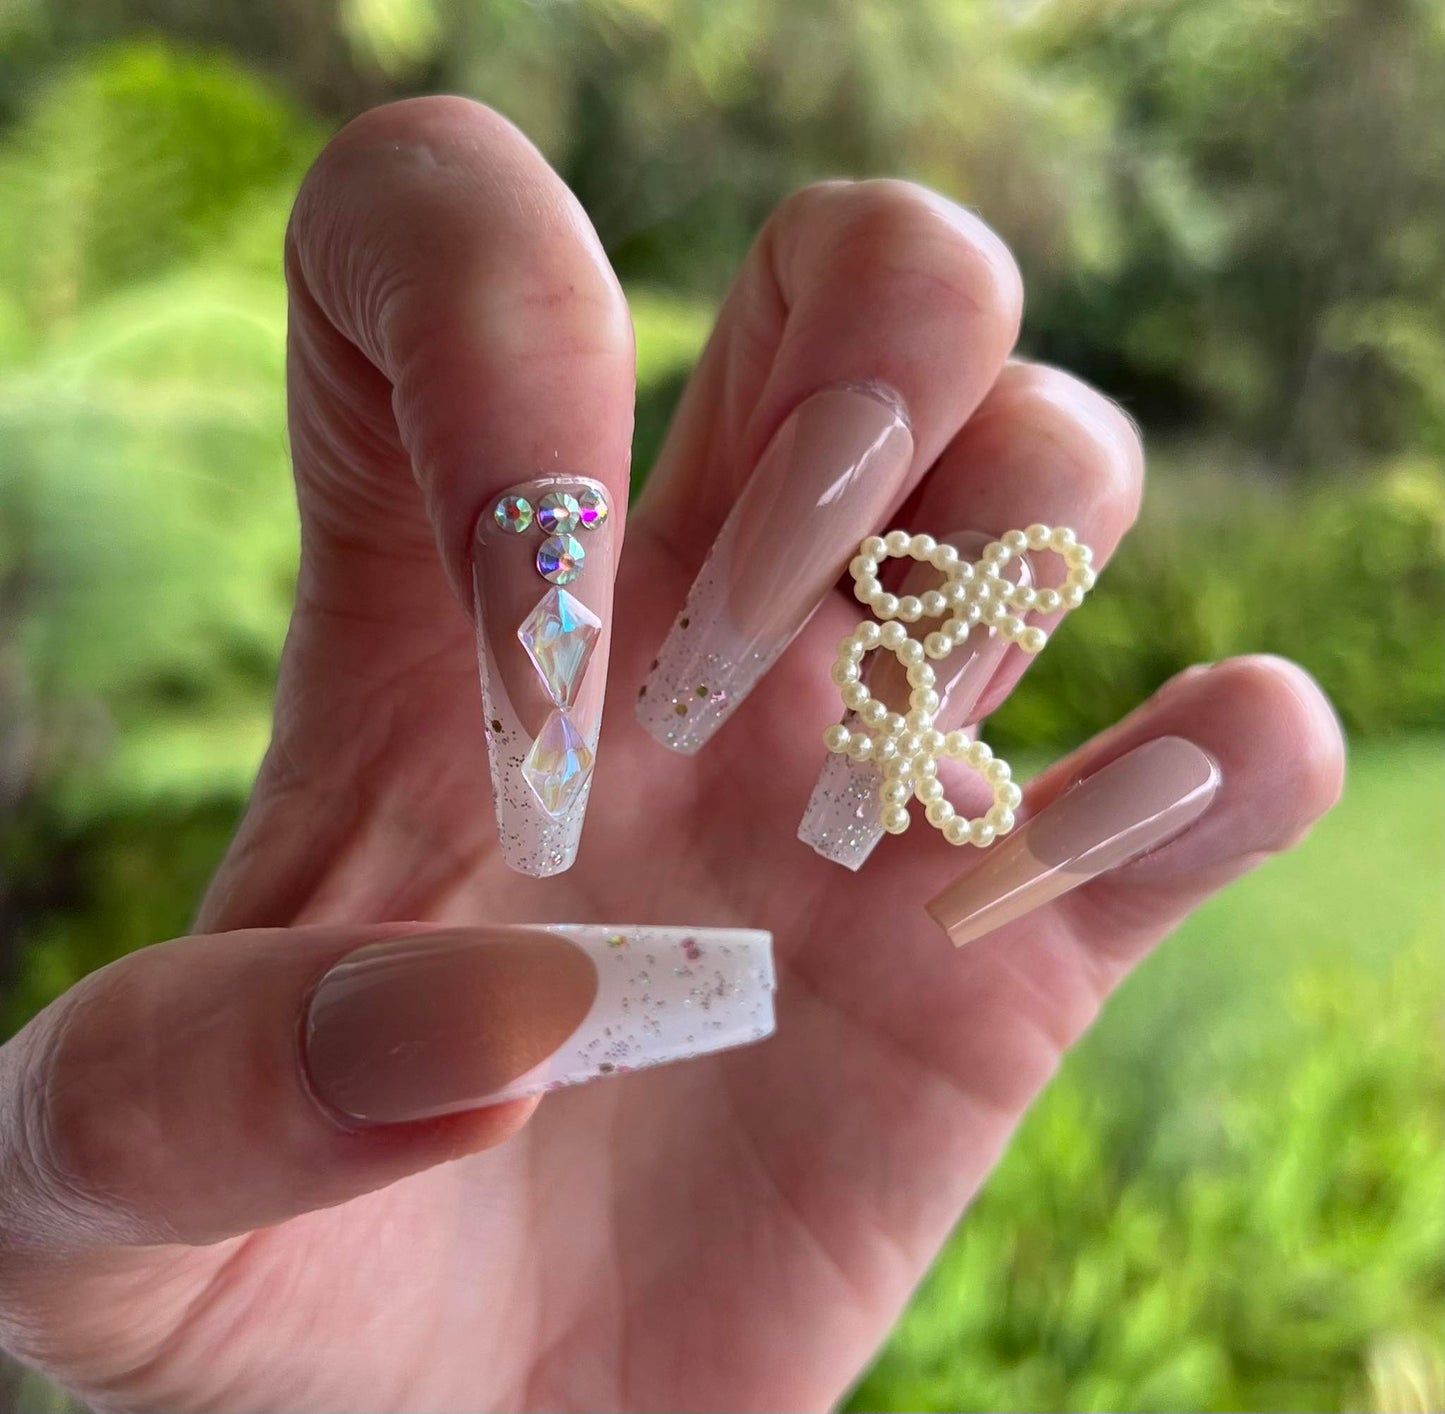 Long Coffin Press on Nails. Beige Latte with Jewels & Bows. Easy and quick to apply. Great for those special occasions, parties or add an edge to any outfit. Gorgeous, flattering and you can re-use them again and again.